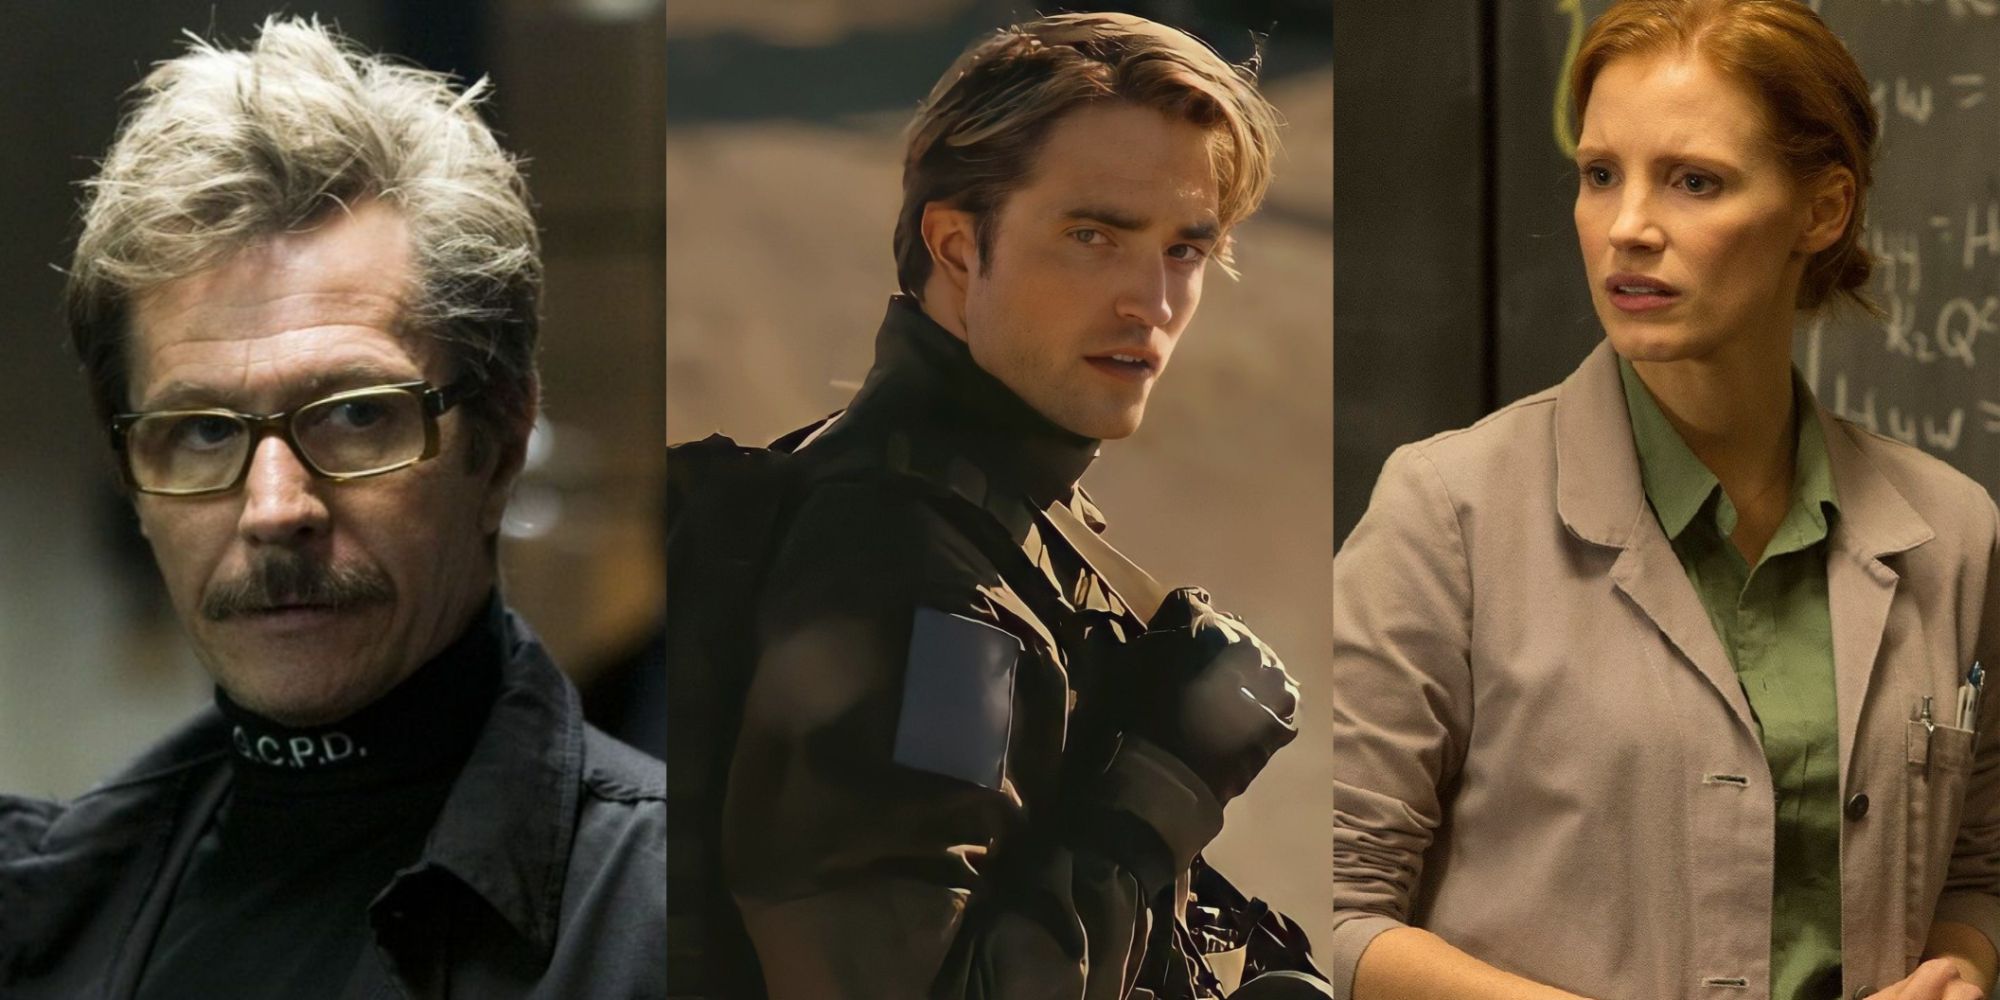 A split image of Christopher Nolan movie characters